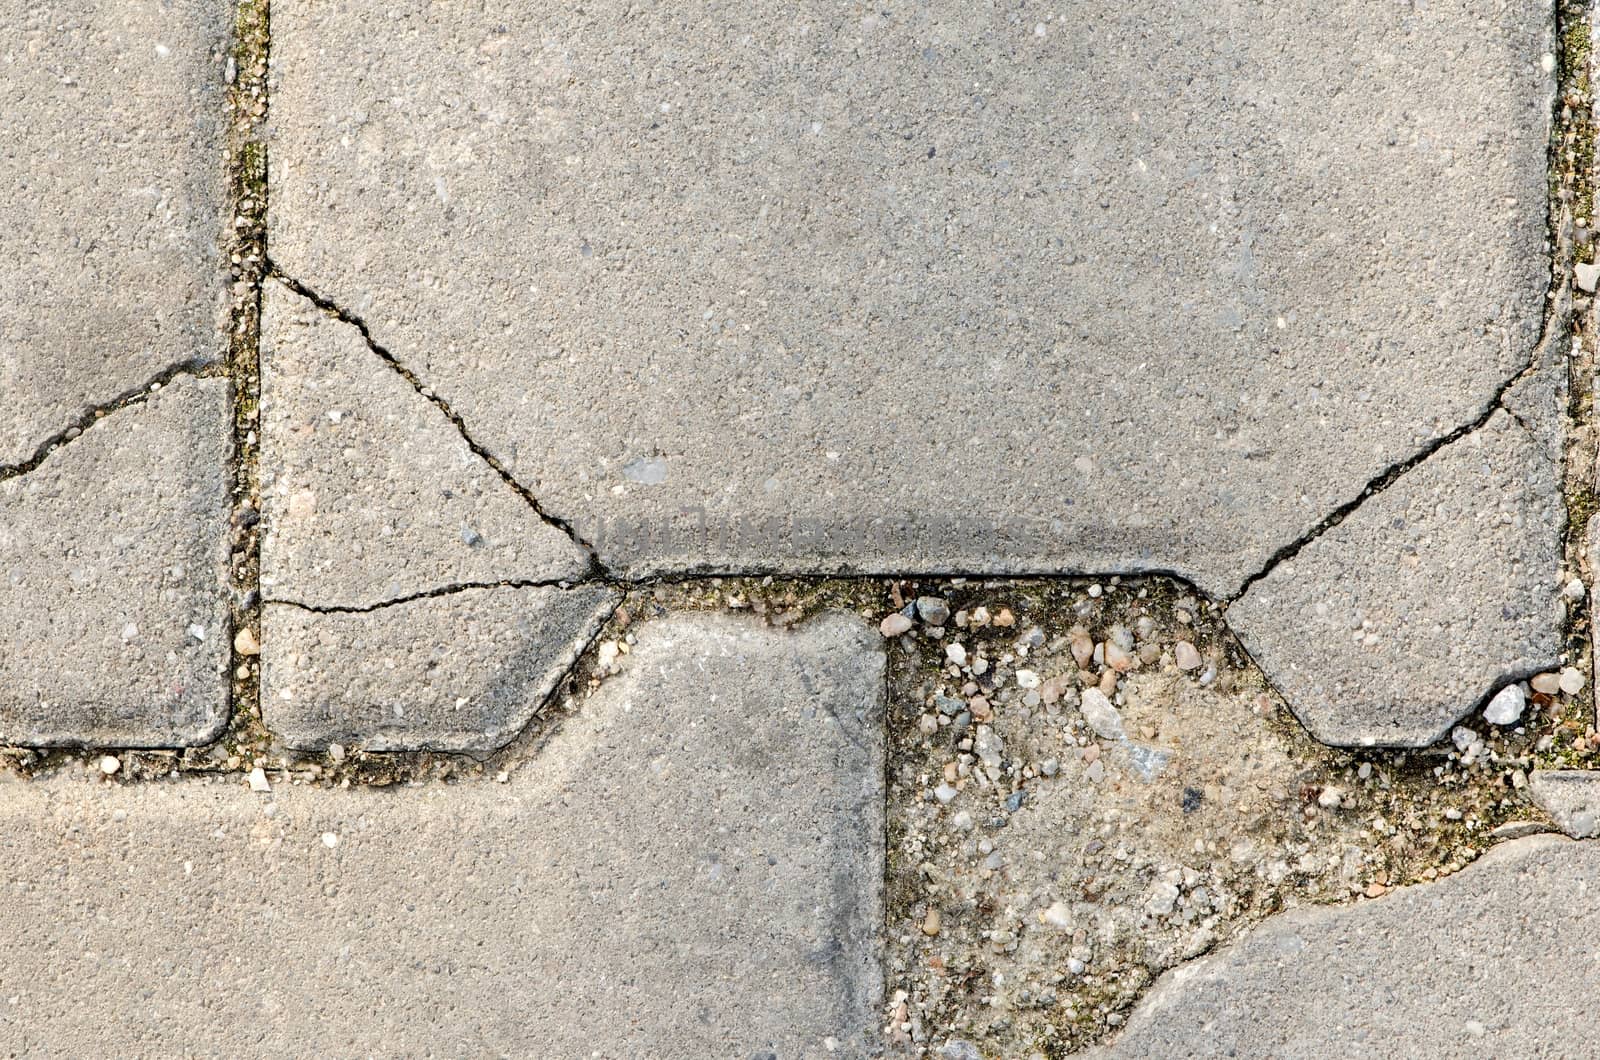 Crackled stone pave with dirt, concrete path texture.